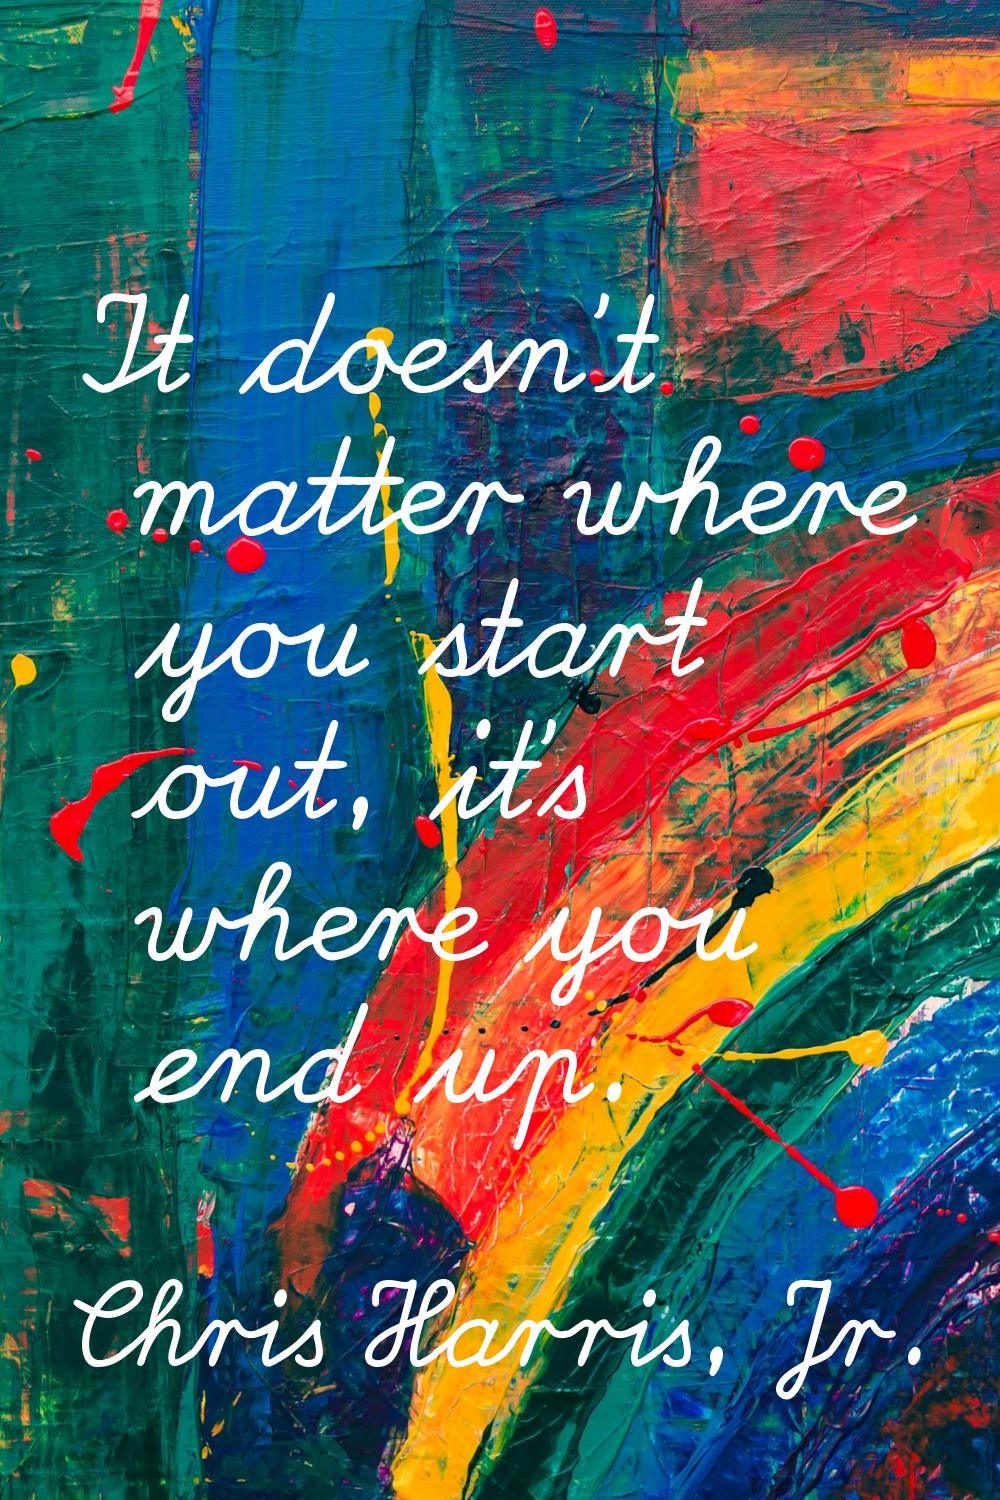 It doesn't matter where you start out, it's where you end up.